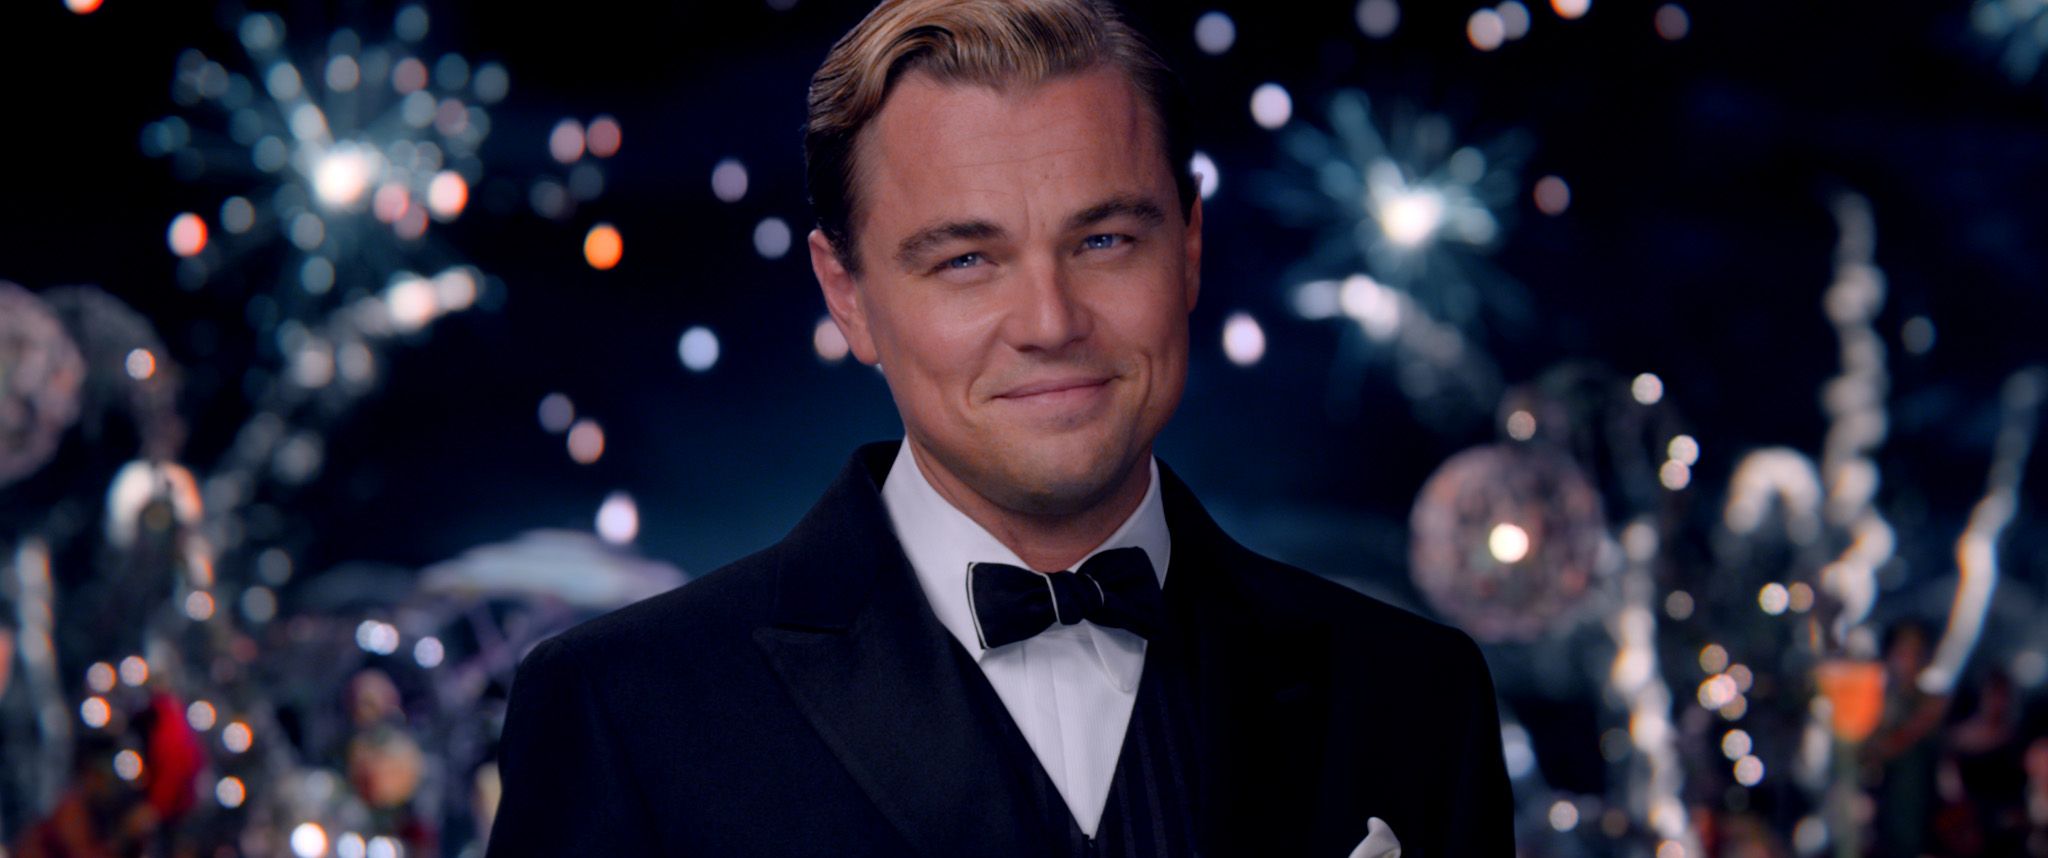 the-great-gatsby-review-the-great-gatsby-stars-leonardo-dicaprio-and